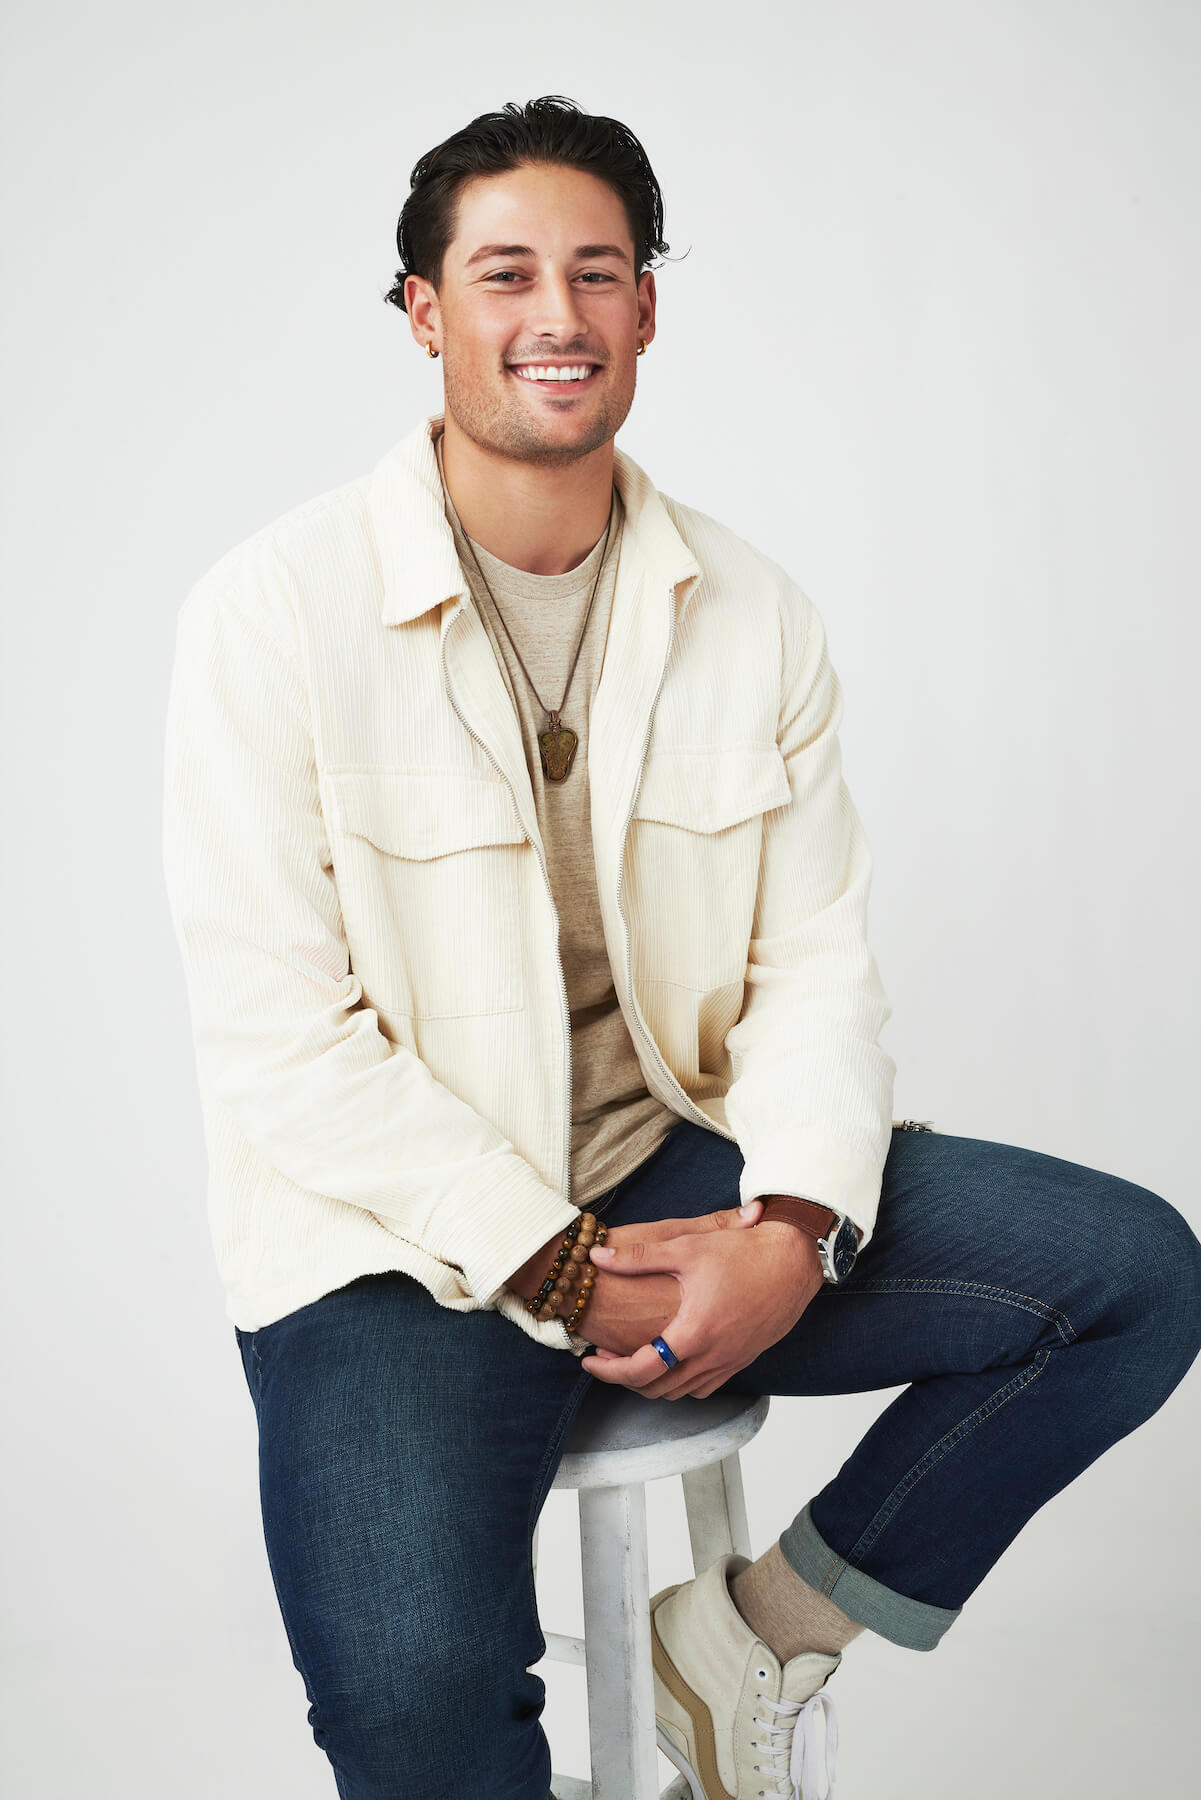 Brayden Bowers from 'The Bachelorette' 2023 sitting on a stool and smiling